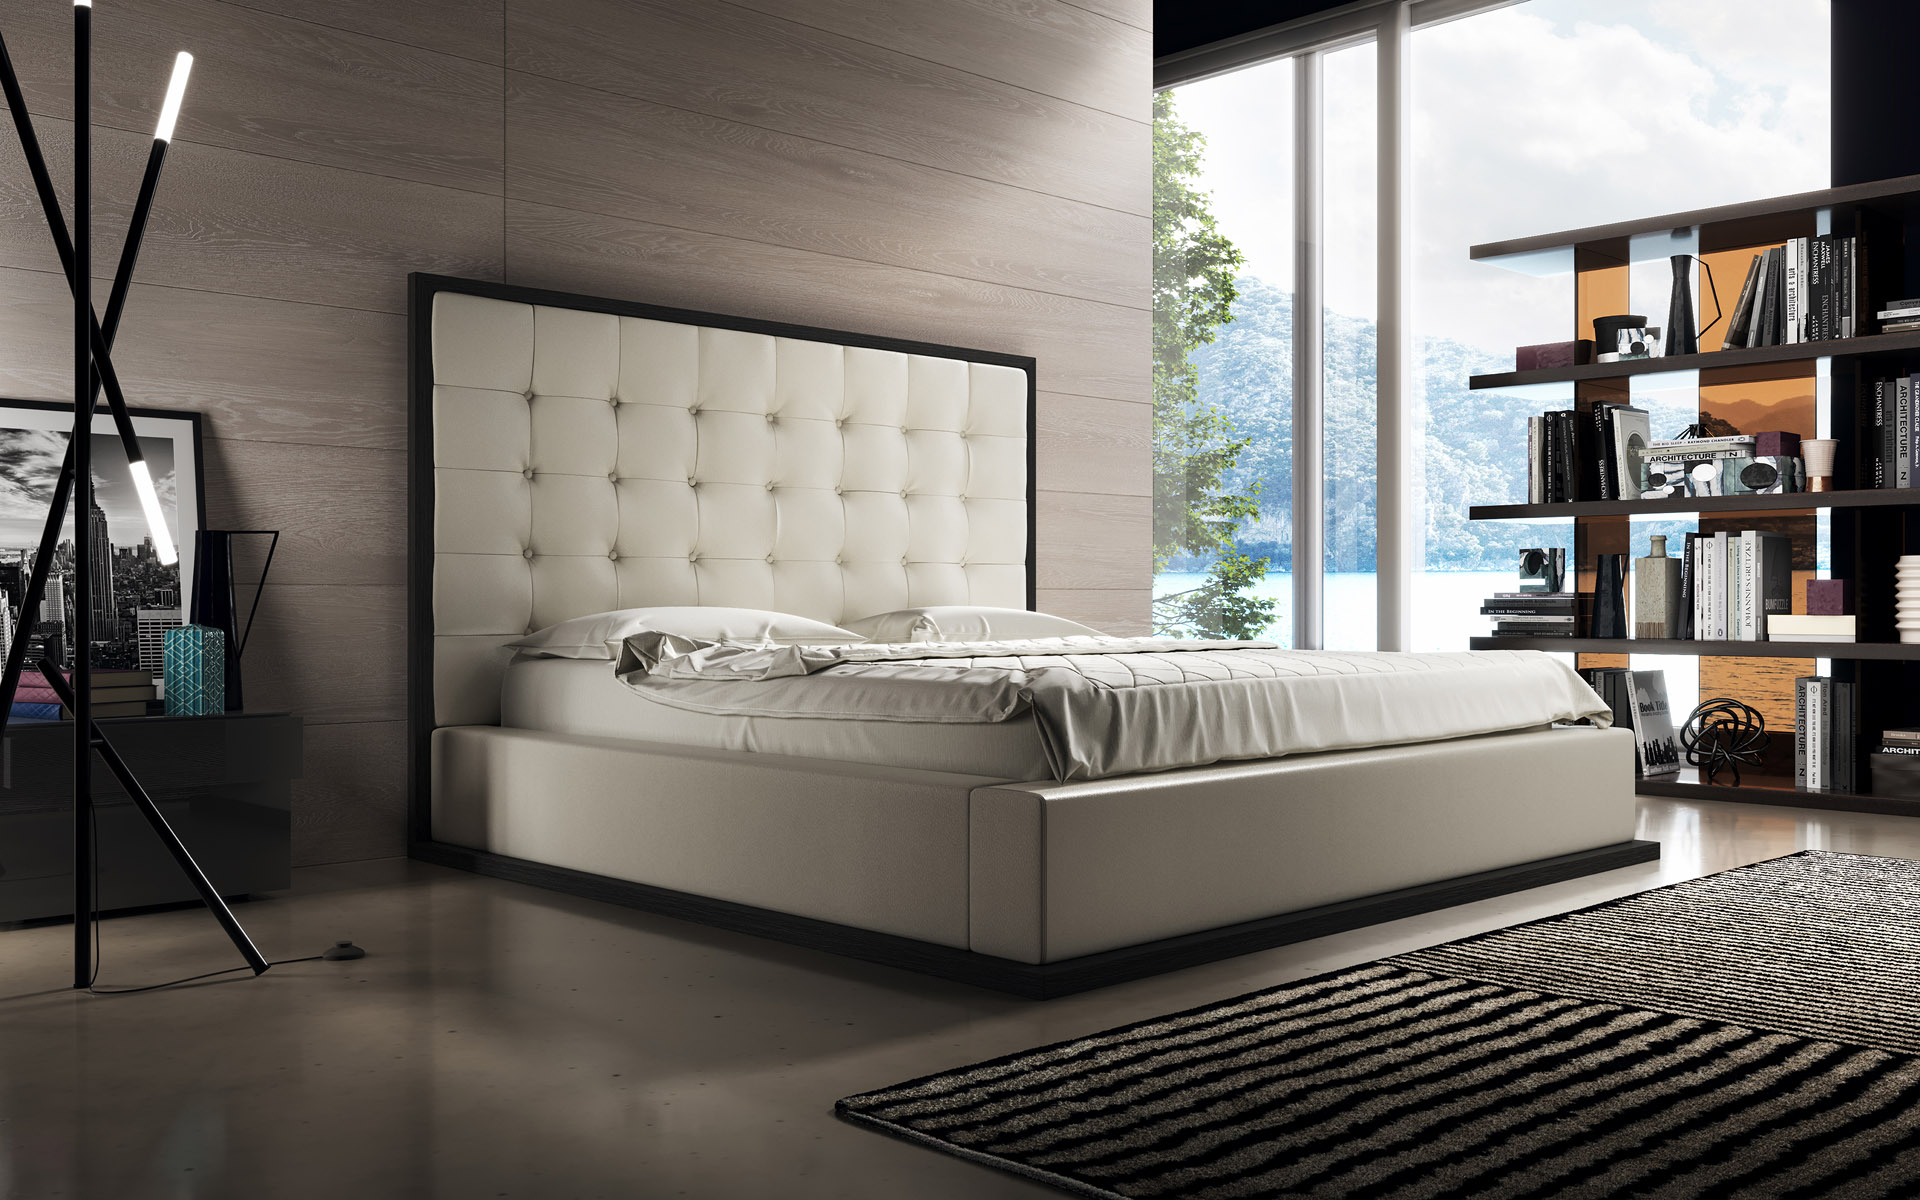 Interior Visualization of a Bedroom